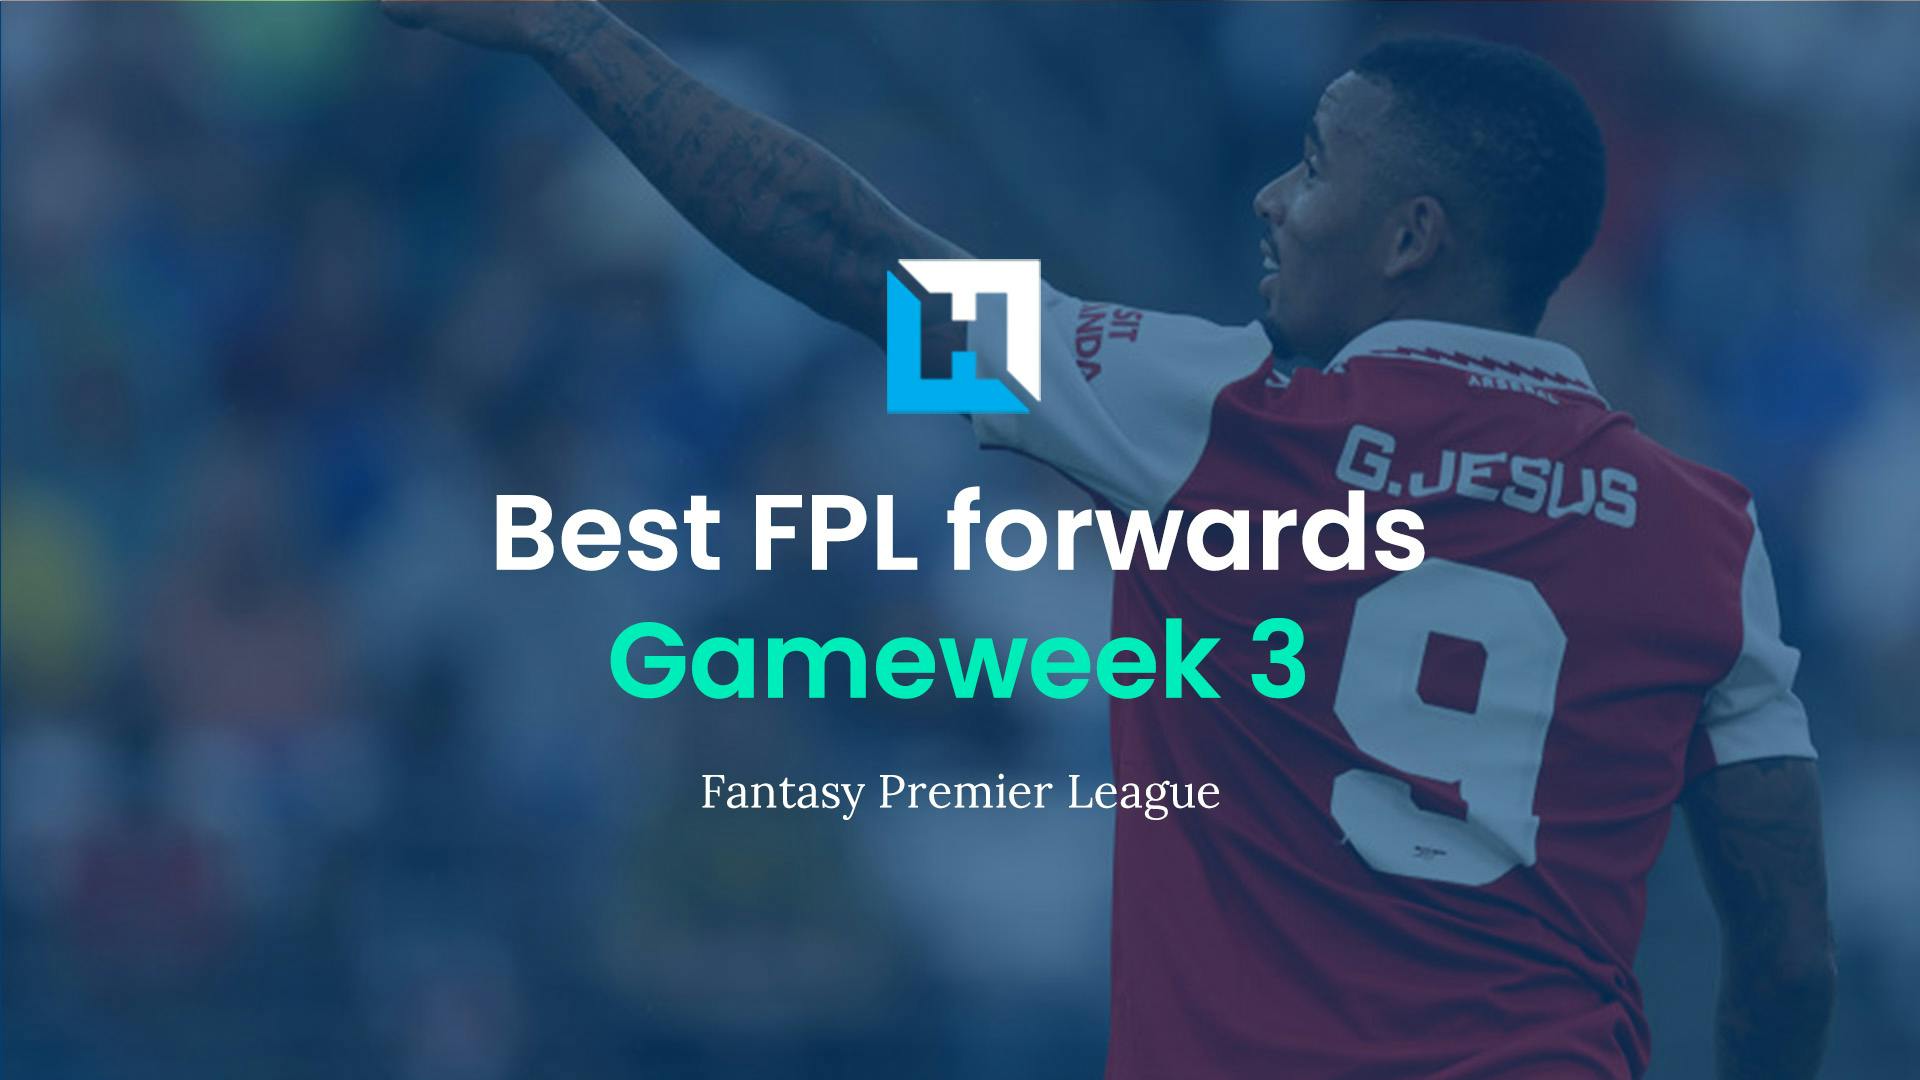 Best FPL players for Gameweek 3: Top 5 best forwards